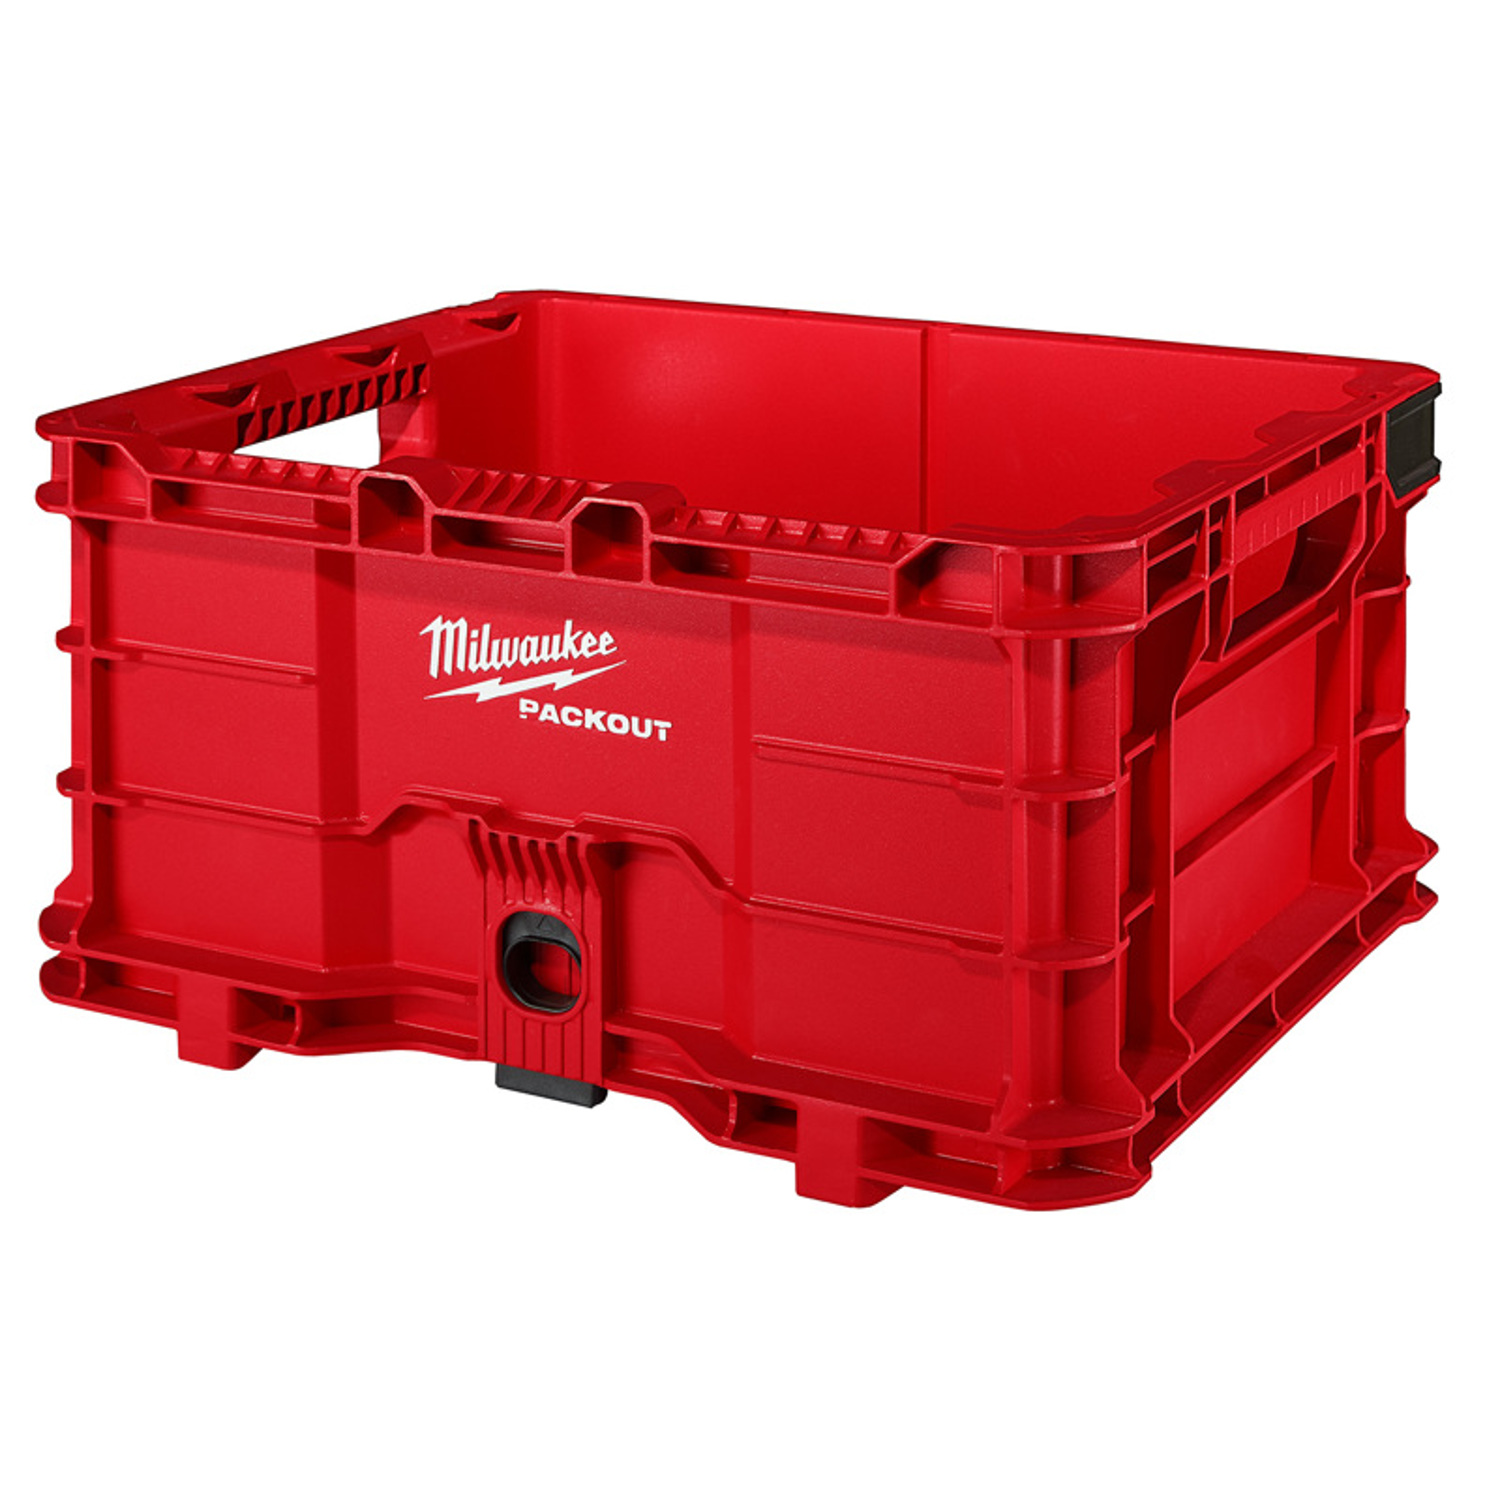 Photos - Clothes Drawer Organiser Milwaukee Packout 50 lb Red Crate 9.9 in. H X 18.6 in. W X 15.3 in. D Stac 